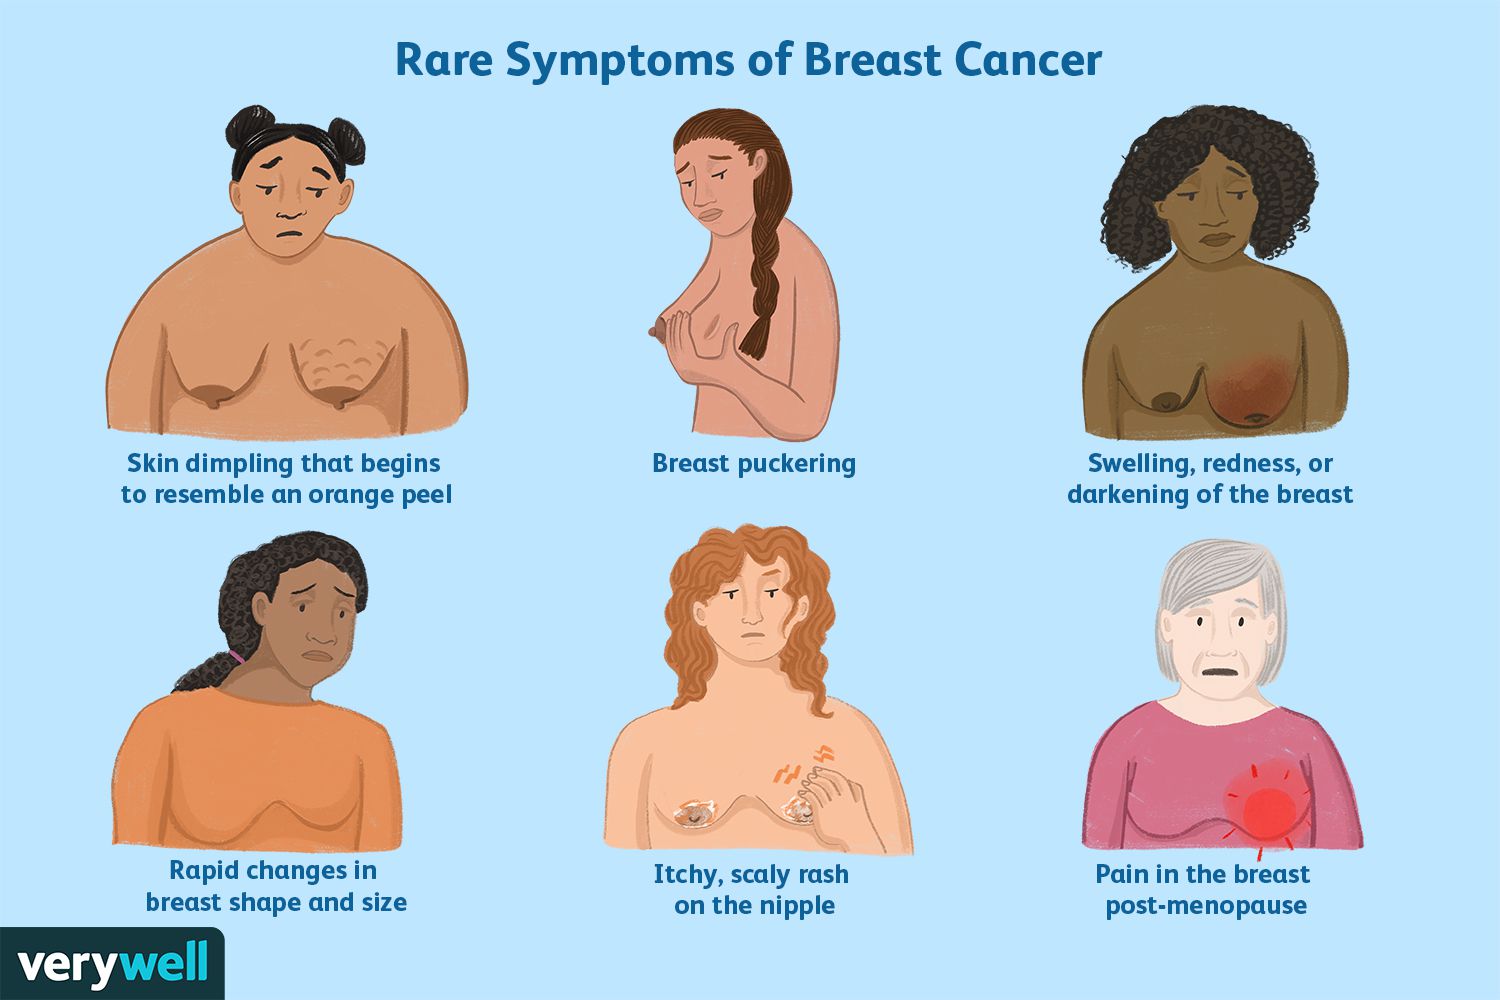 Breast cancer symptoms can include pain and itching. It is important to seek medical attention if these symptoms persist.